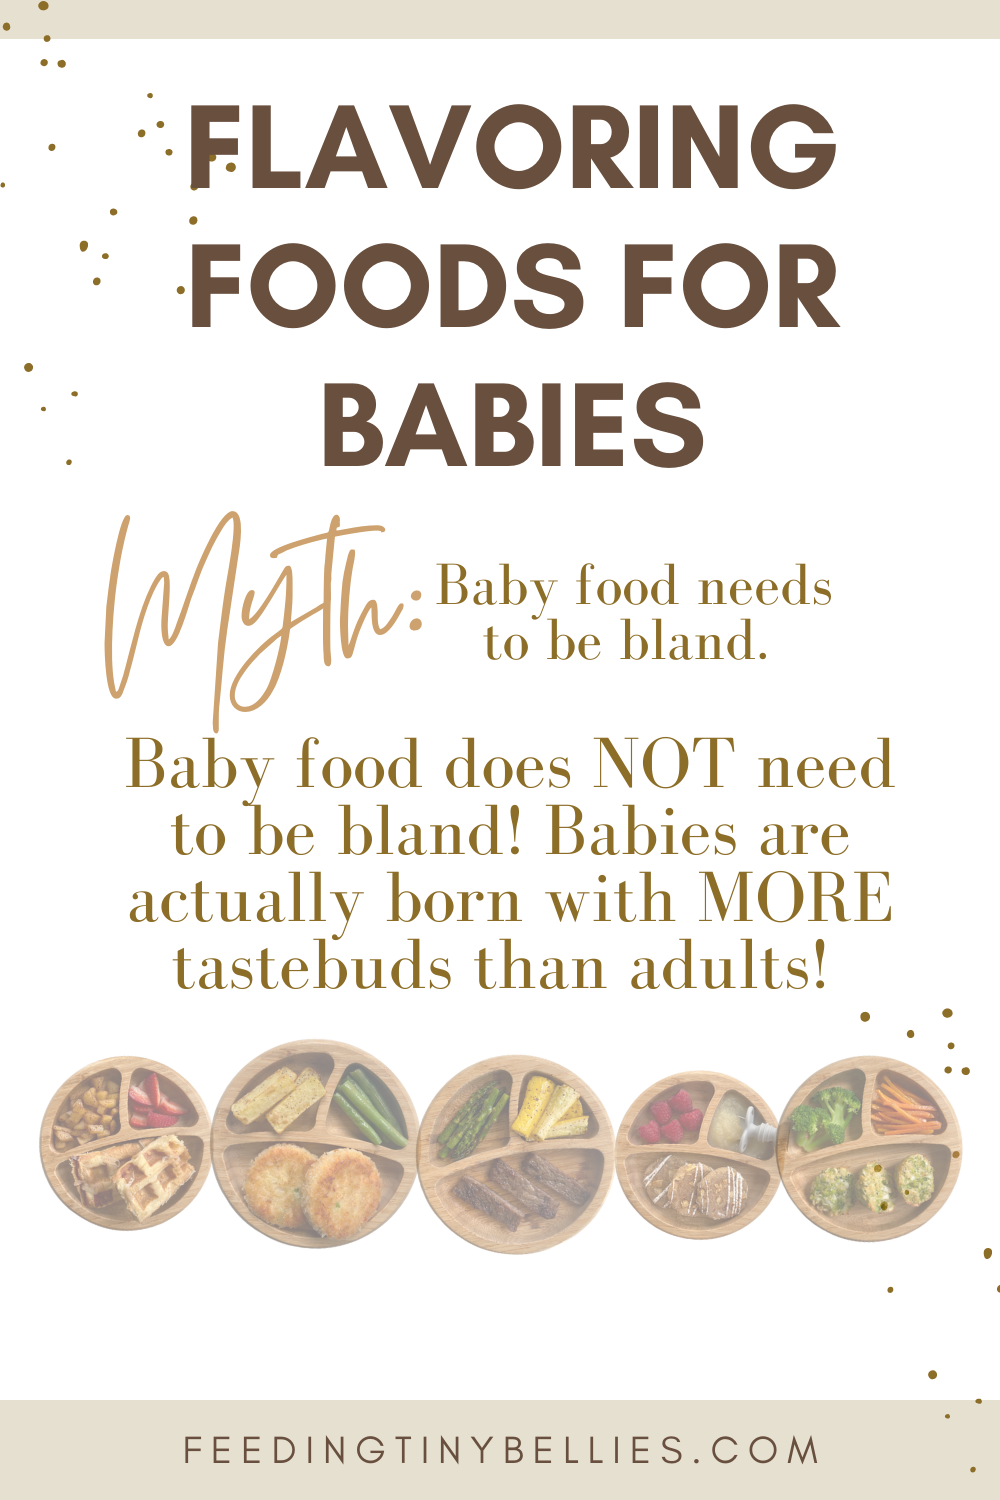 Flavoring foods for babies. Myth: Baby food needs to be bland.